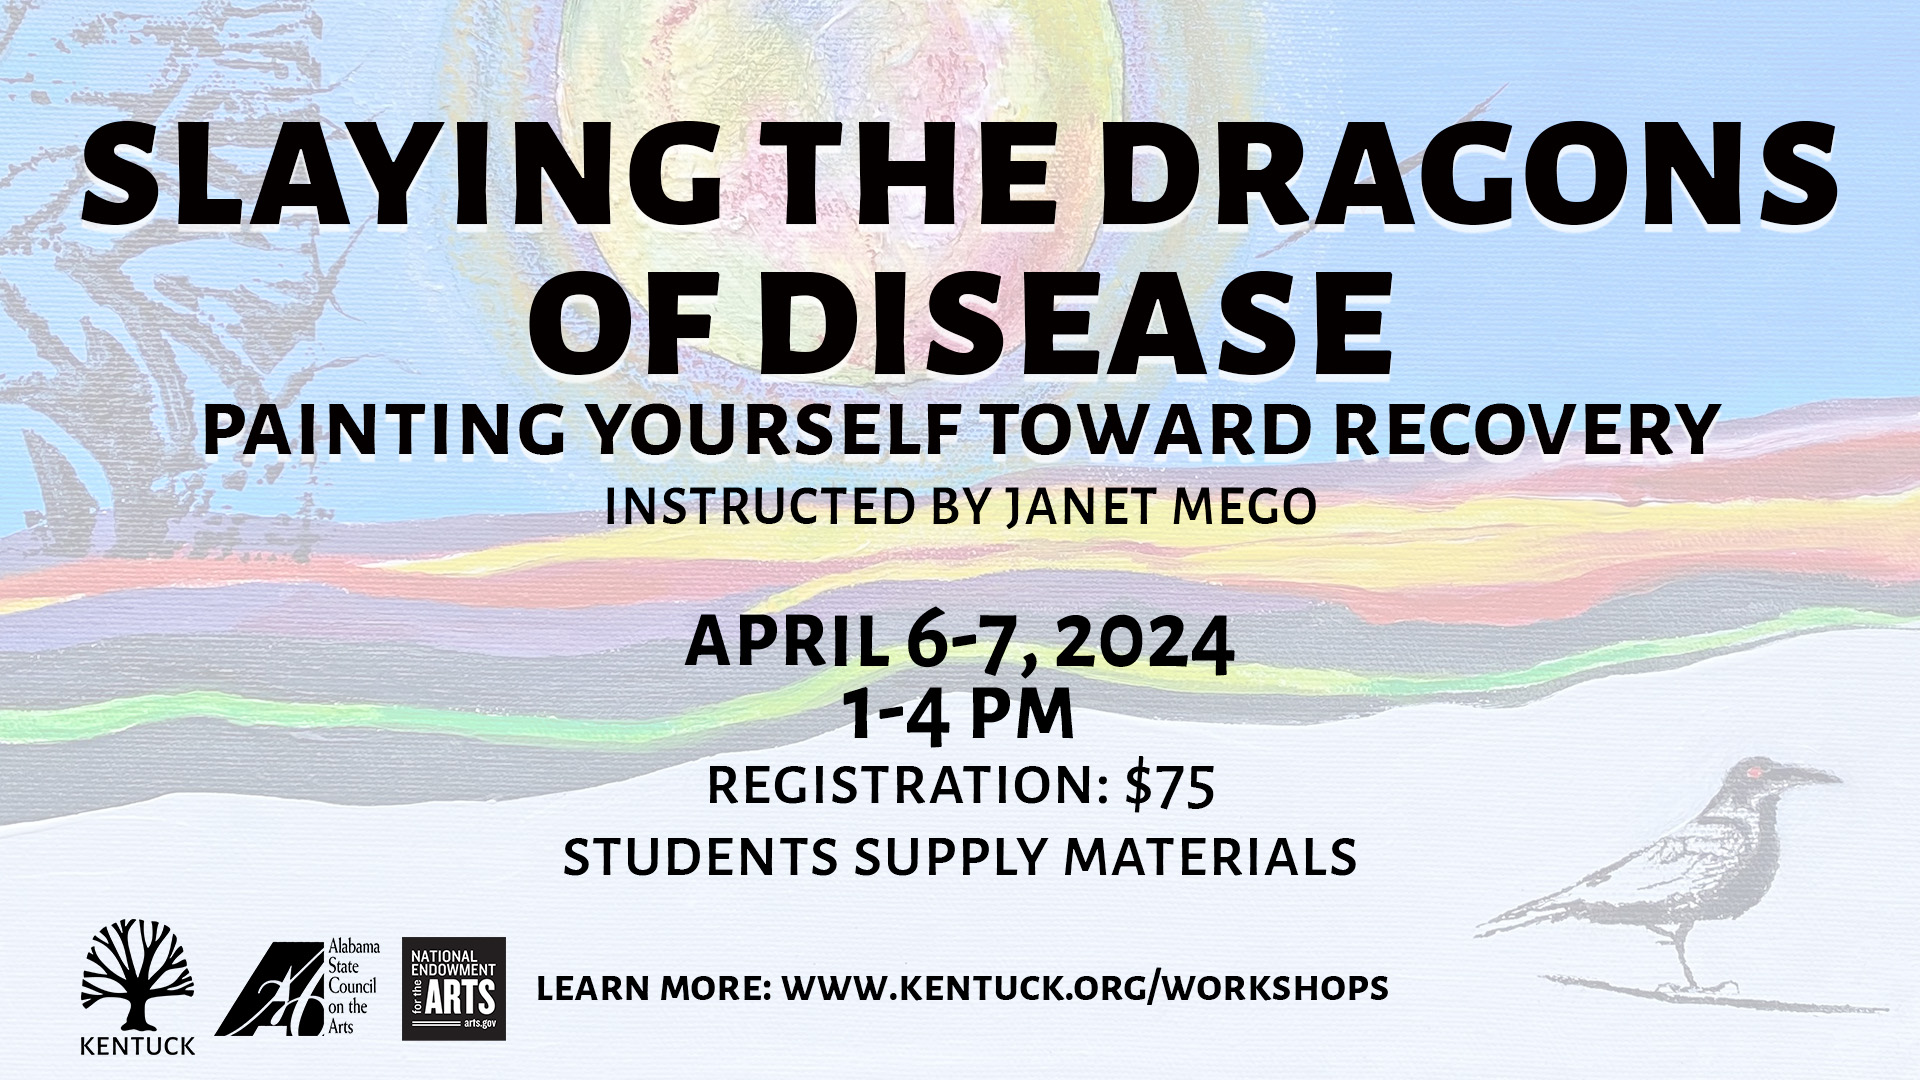 Slaying the Dragons of Disease: Painting Yourself Toward Recovery with Janet Mego cover image